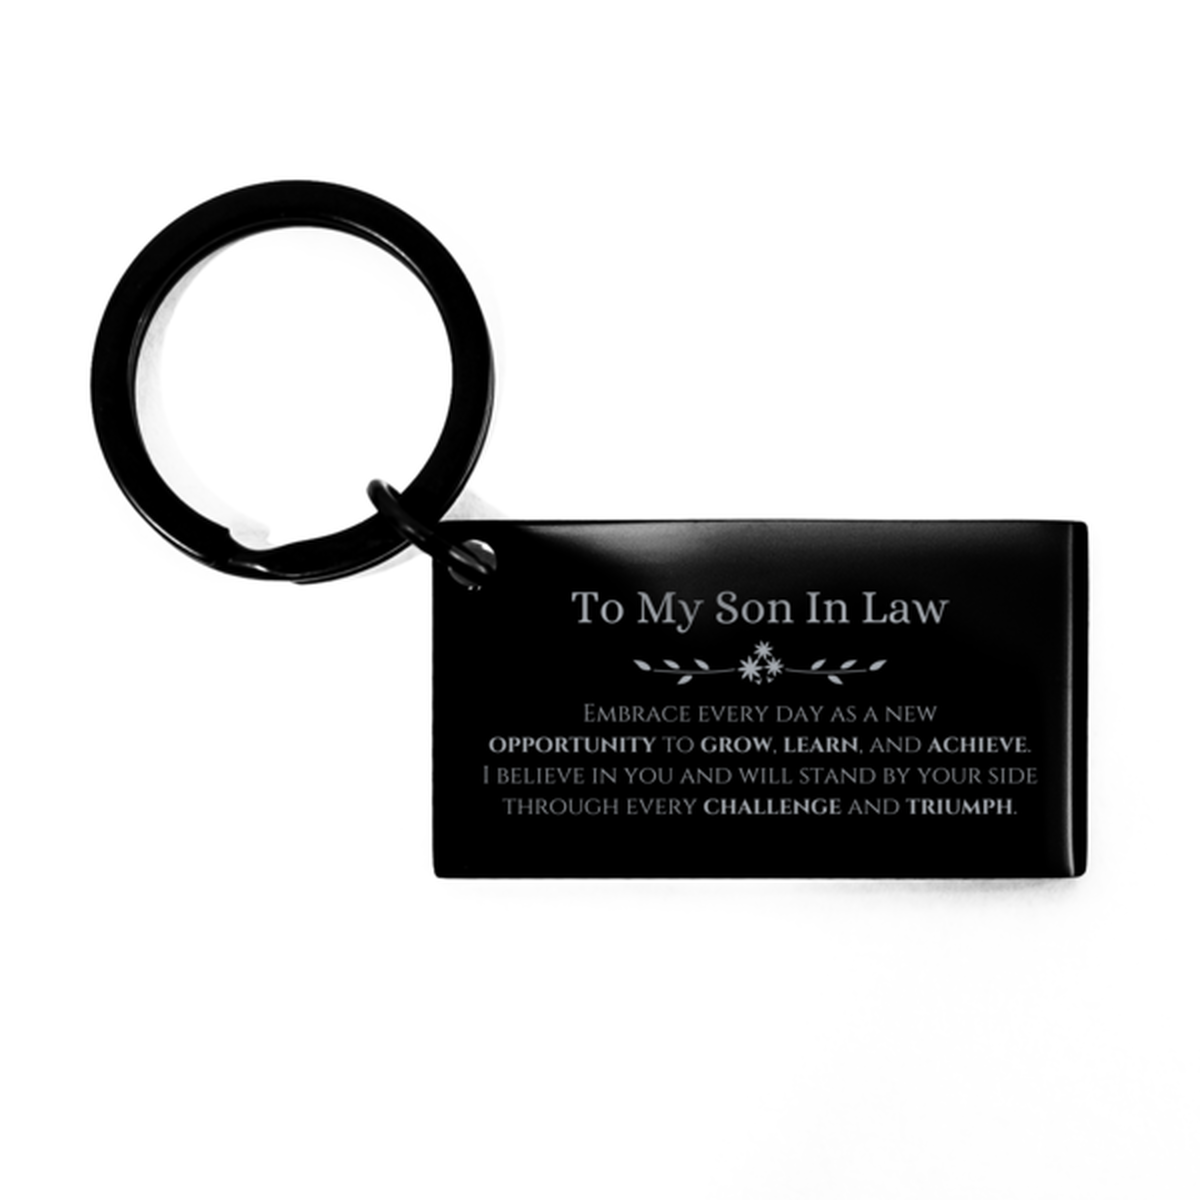 To My Son In Law Gifts, I believe in you and will stand by your side, Inspirational Keychain For Son In Law, Birthday Christmas Motivational Son In Law Gifts